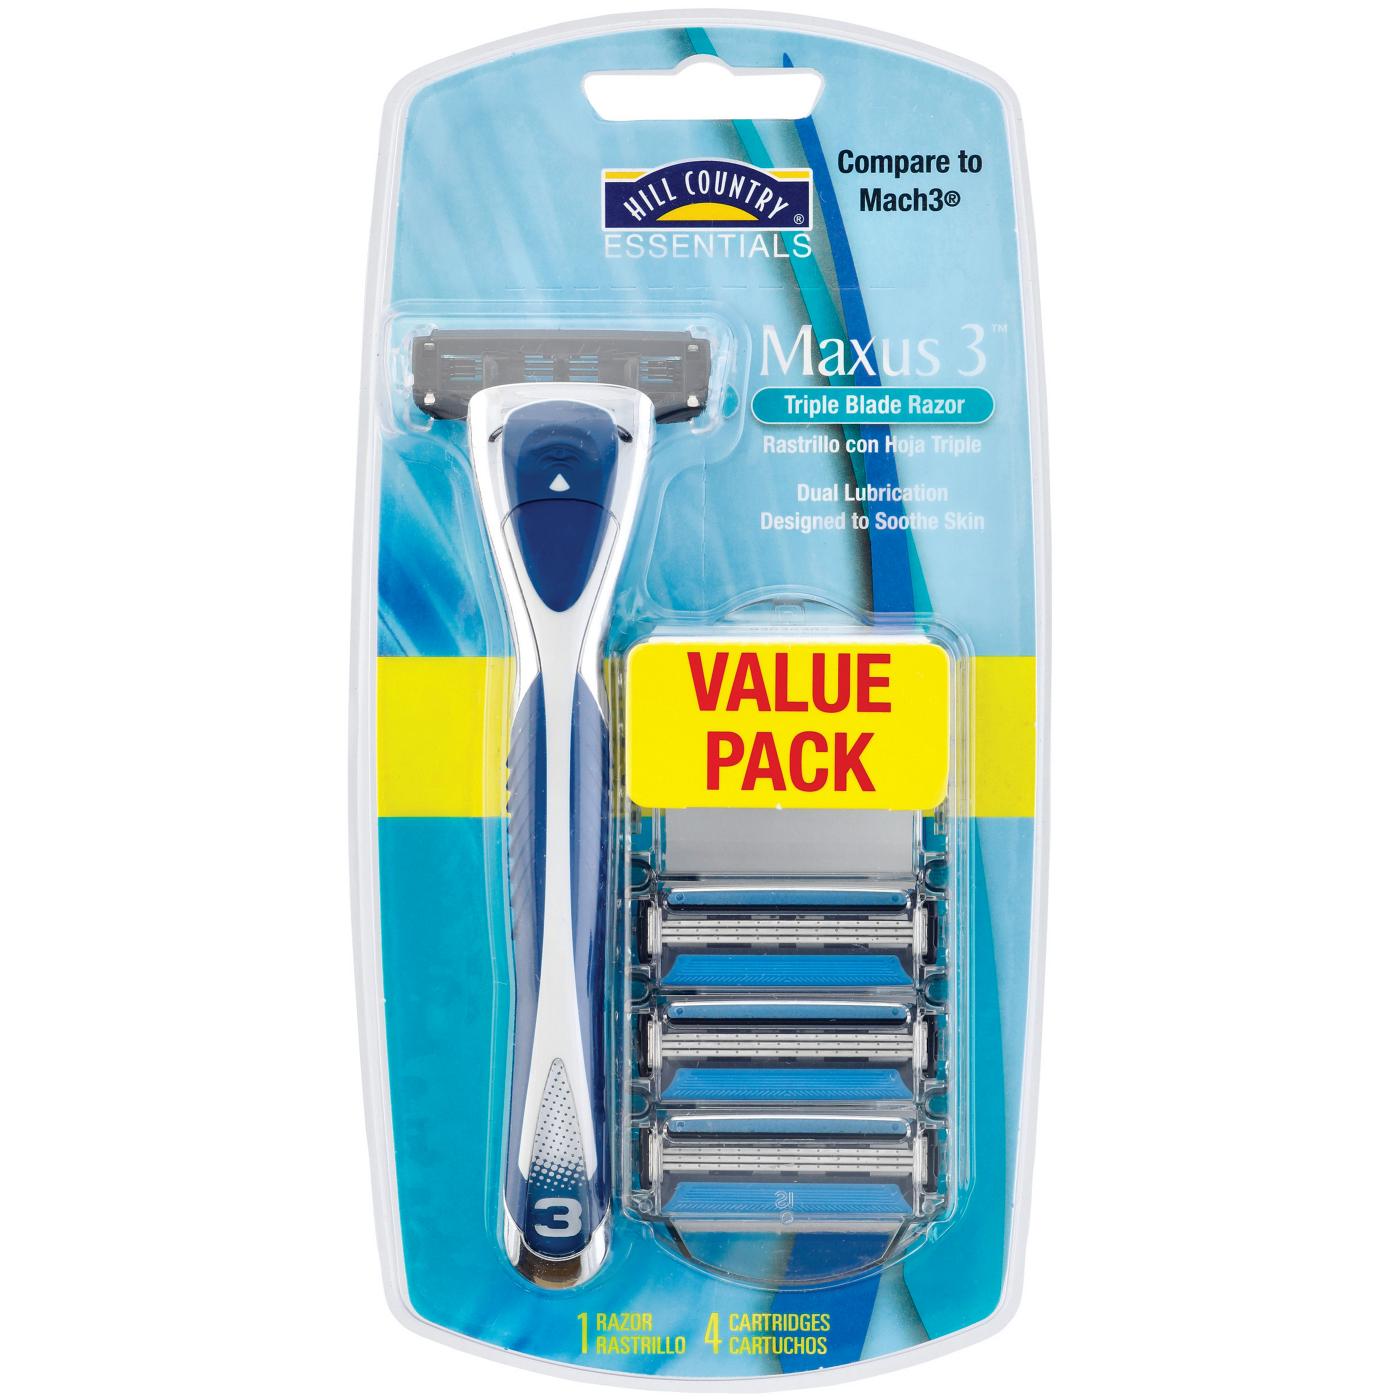 Hill Country Essentials Maxus3 Triple Blade Razor Value Pack with Refill Cartridges; image 1 of 5